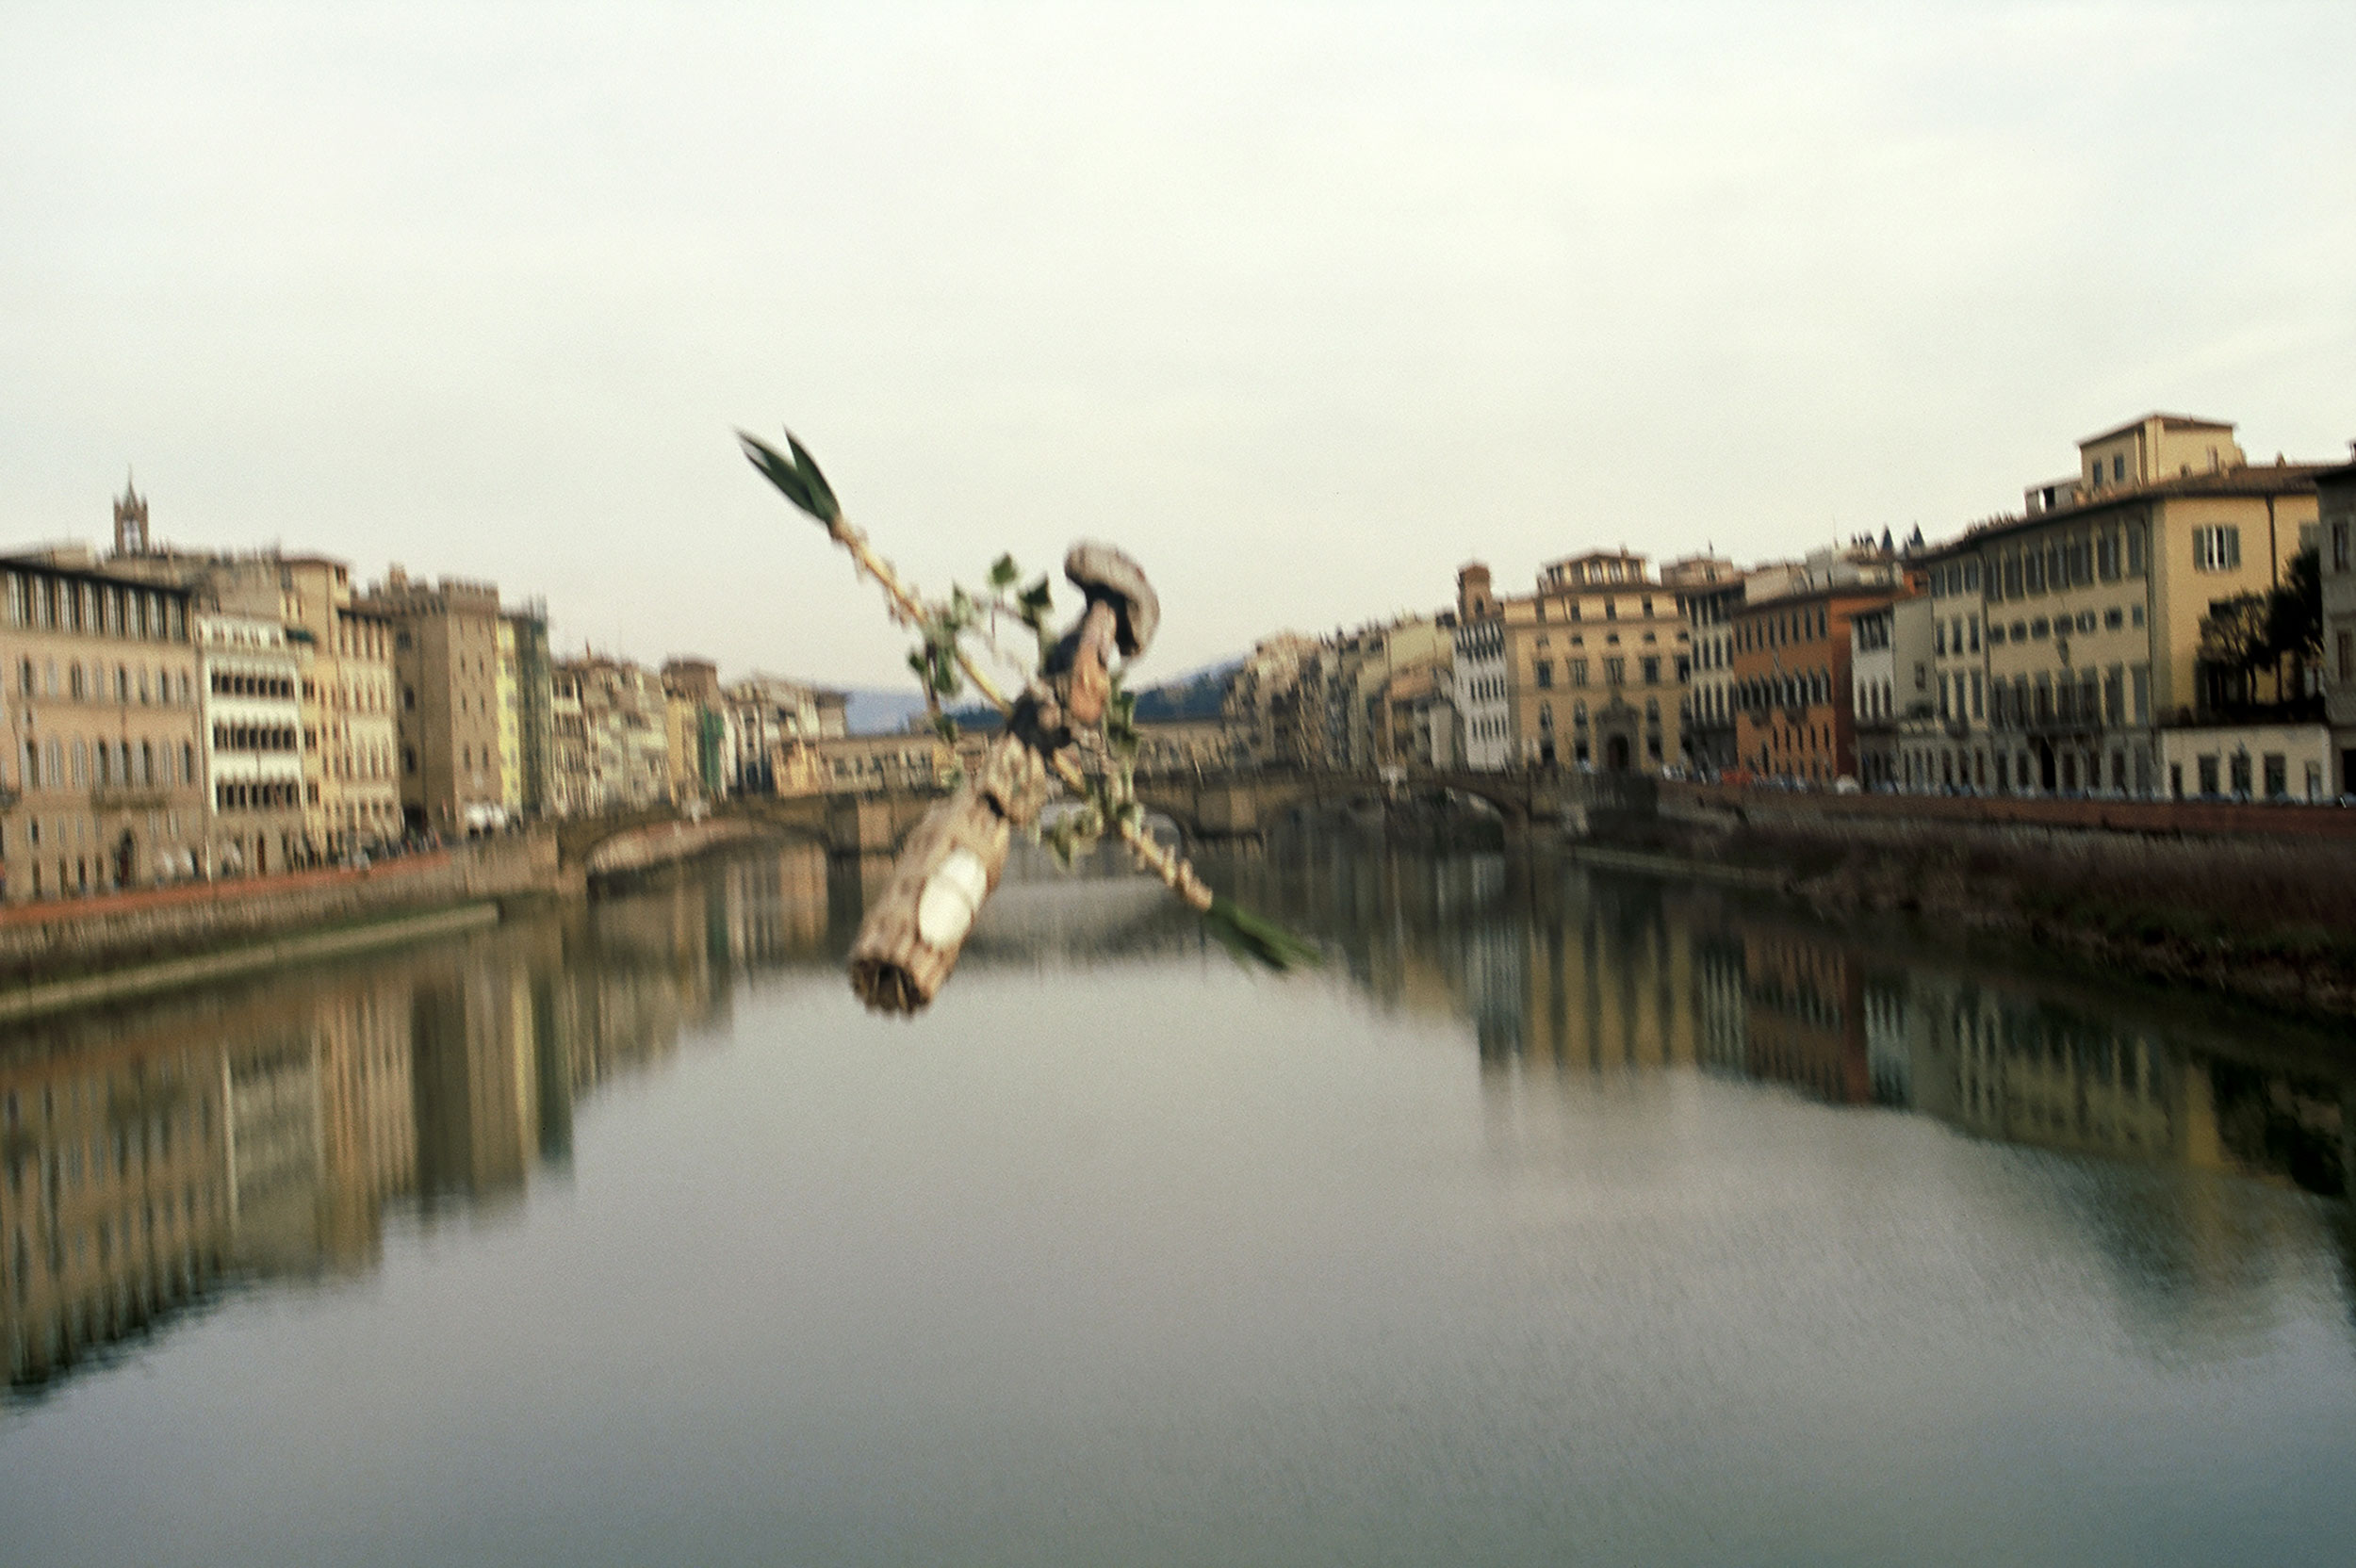 To the Arno River, Florence, Italy